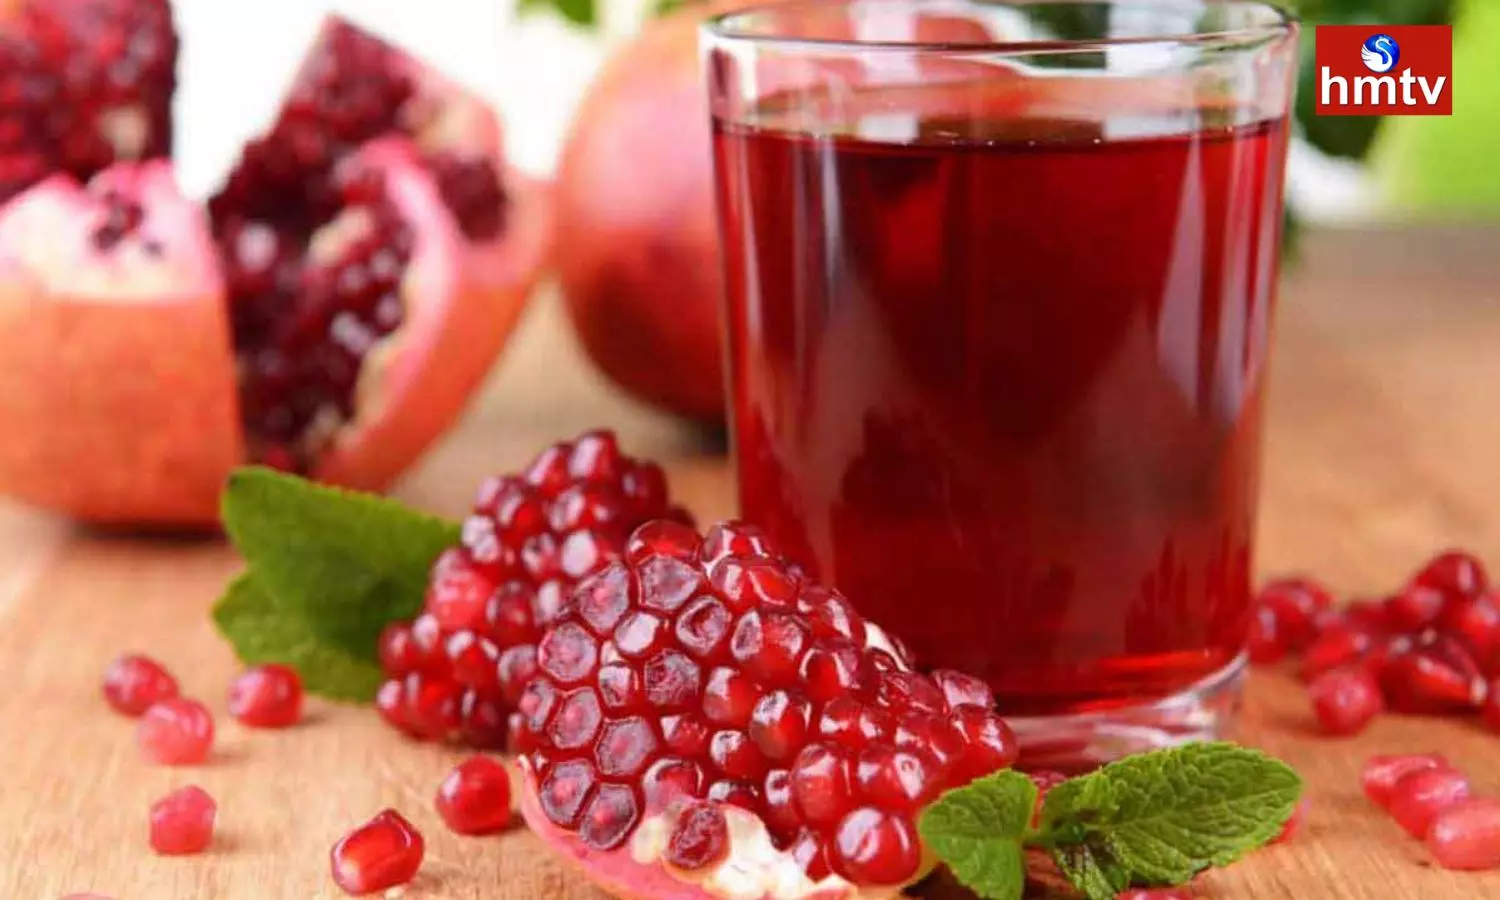 Pomegranate Juice is a Boon for Health and Drinking it Daily can Provide These Great Benefits